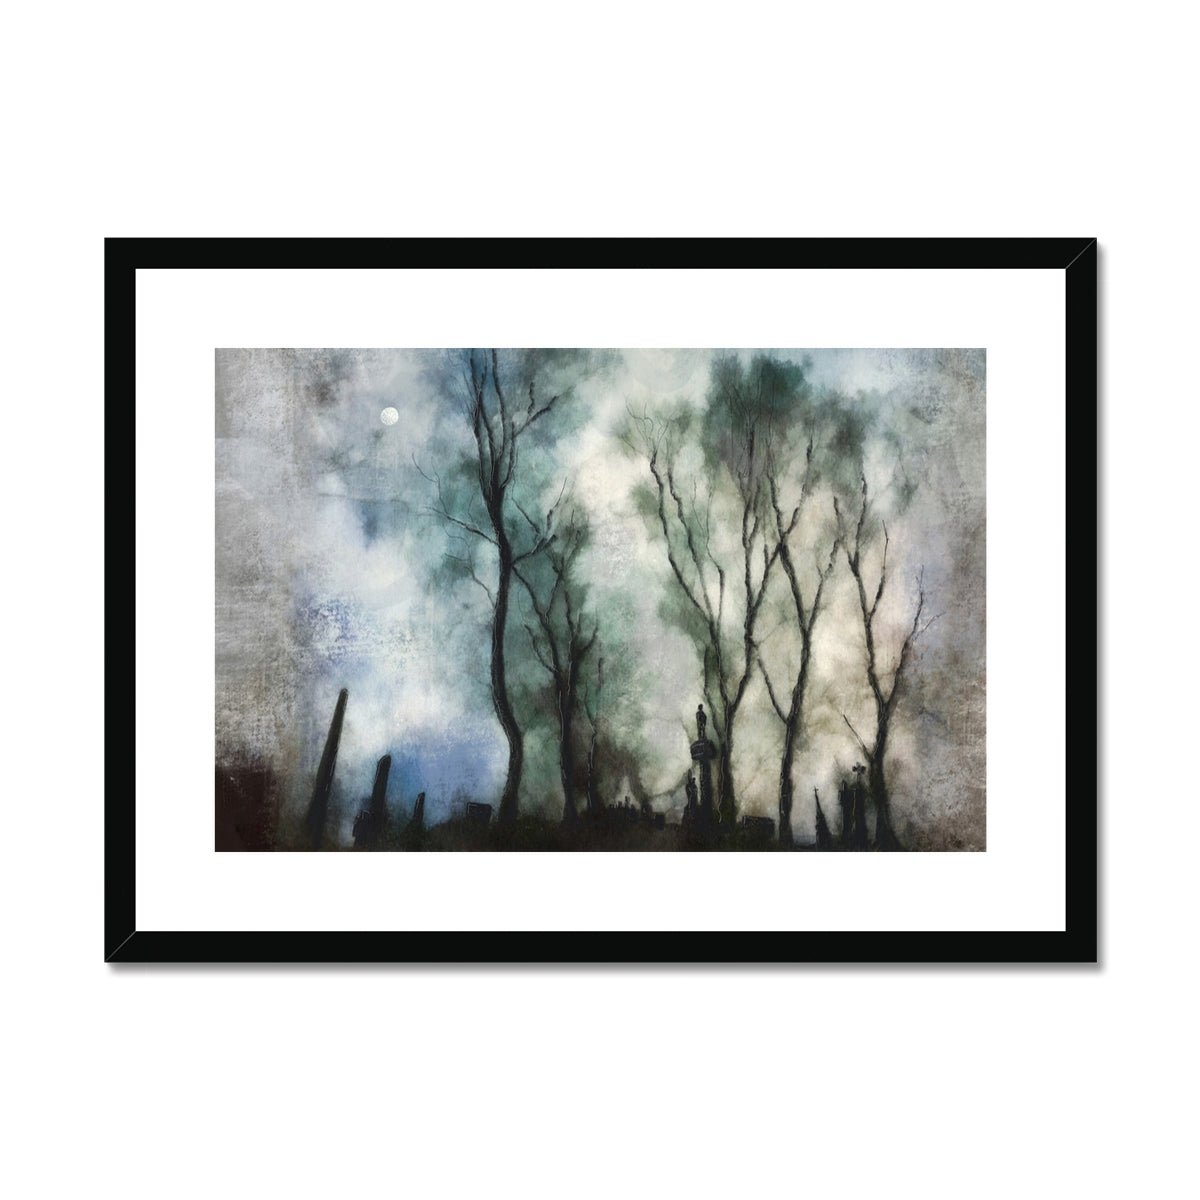 Glasgow Necropolis Moonlight Painting | Framed & Mounted Prints From Scotland-Framed & Mounted Prints-Edinburgh & Glasgow Art Gallery-A2 Landscape-Black Frame-Paintings, Prints, Homeware, Art Gifts From Scotland By Scottish Artist Kevin Hunter